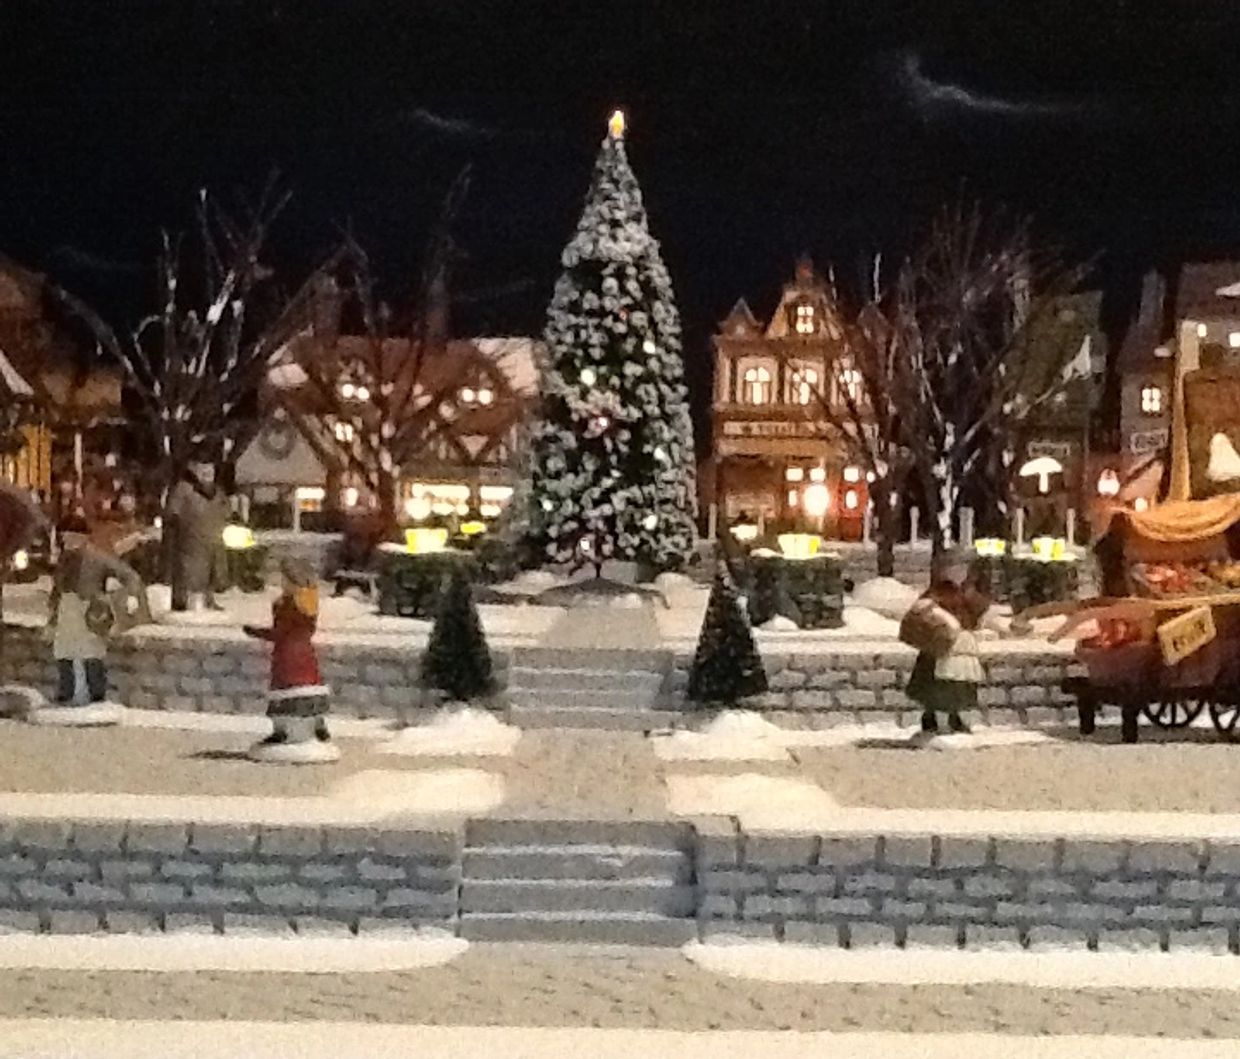 Front view of the Christmas Square platform